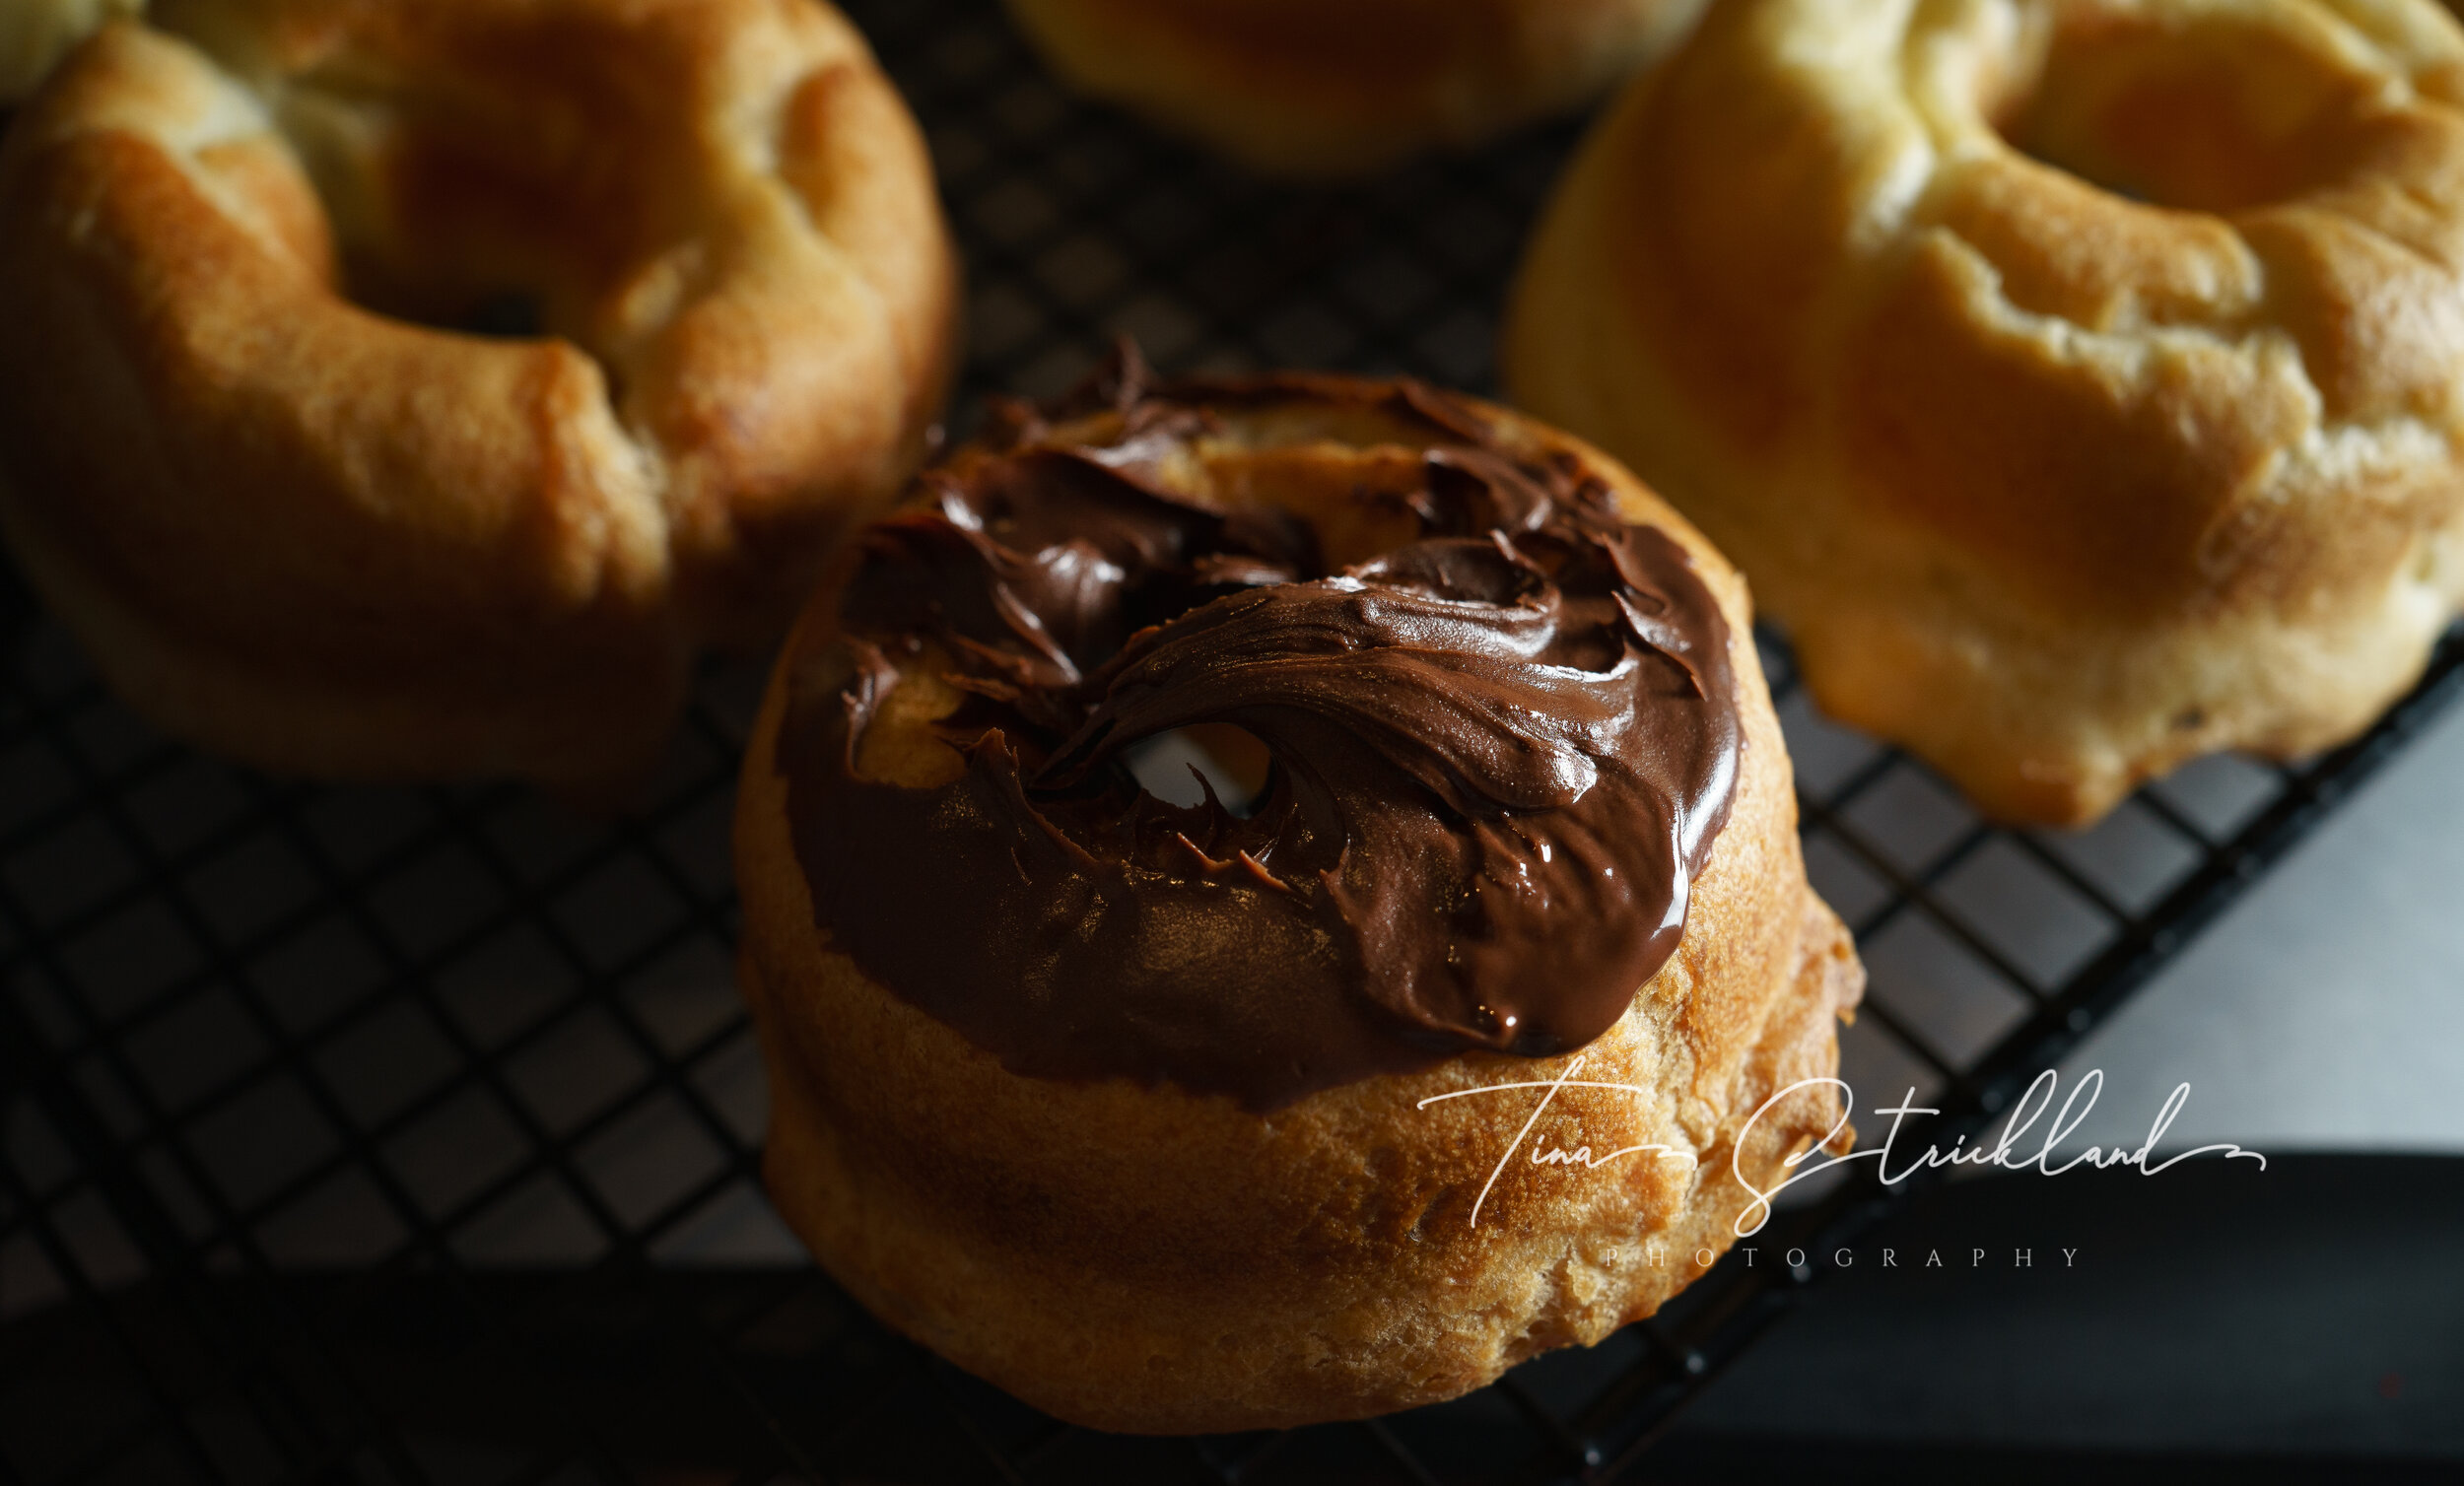 Chocolate covered doughnuts